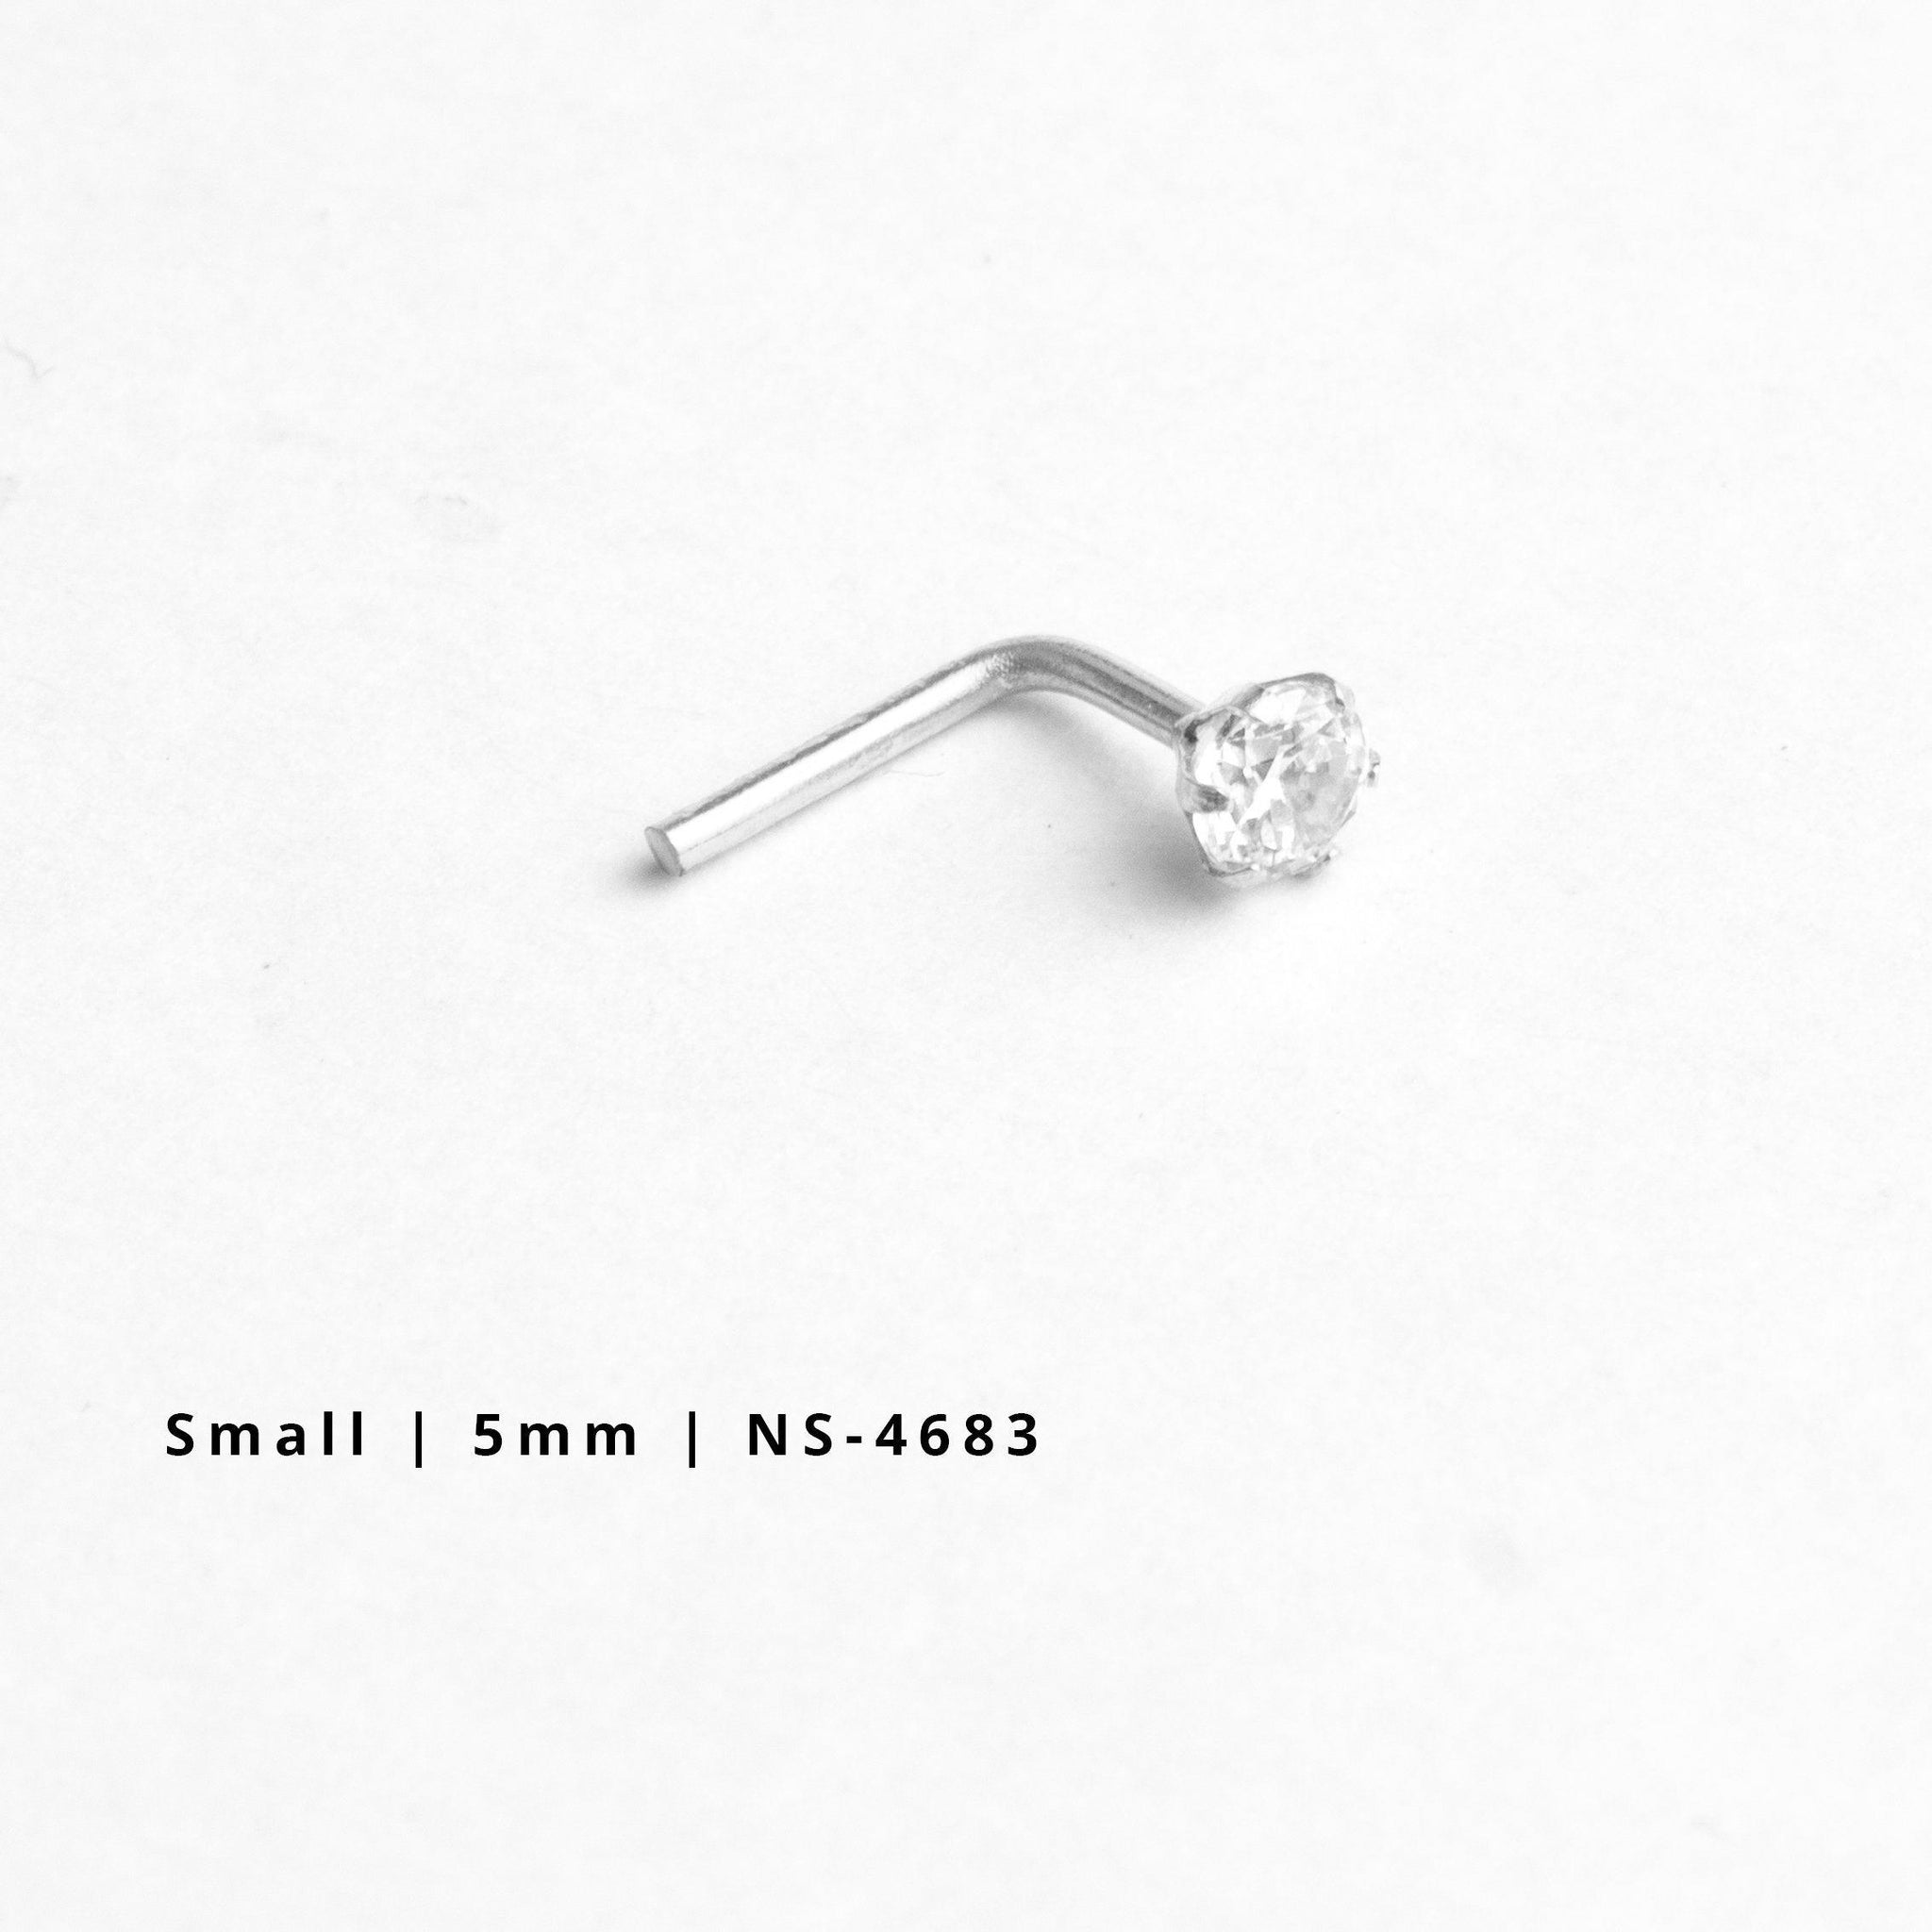 18ct Gold Nose Stud L-Shaped back with a Cubic Zirconia Stone (2.5mm - 3.5mm)